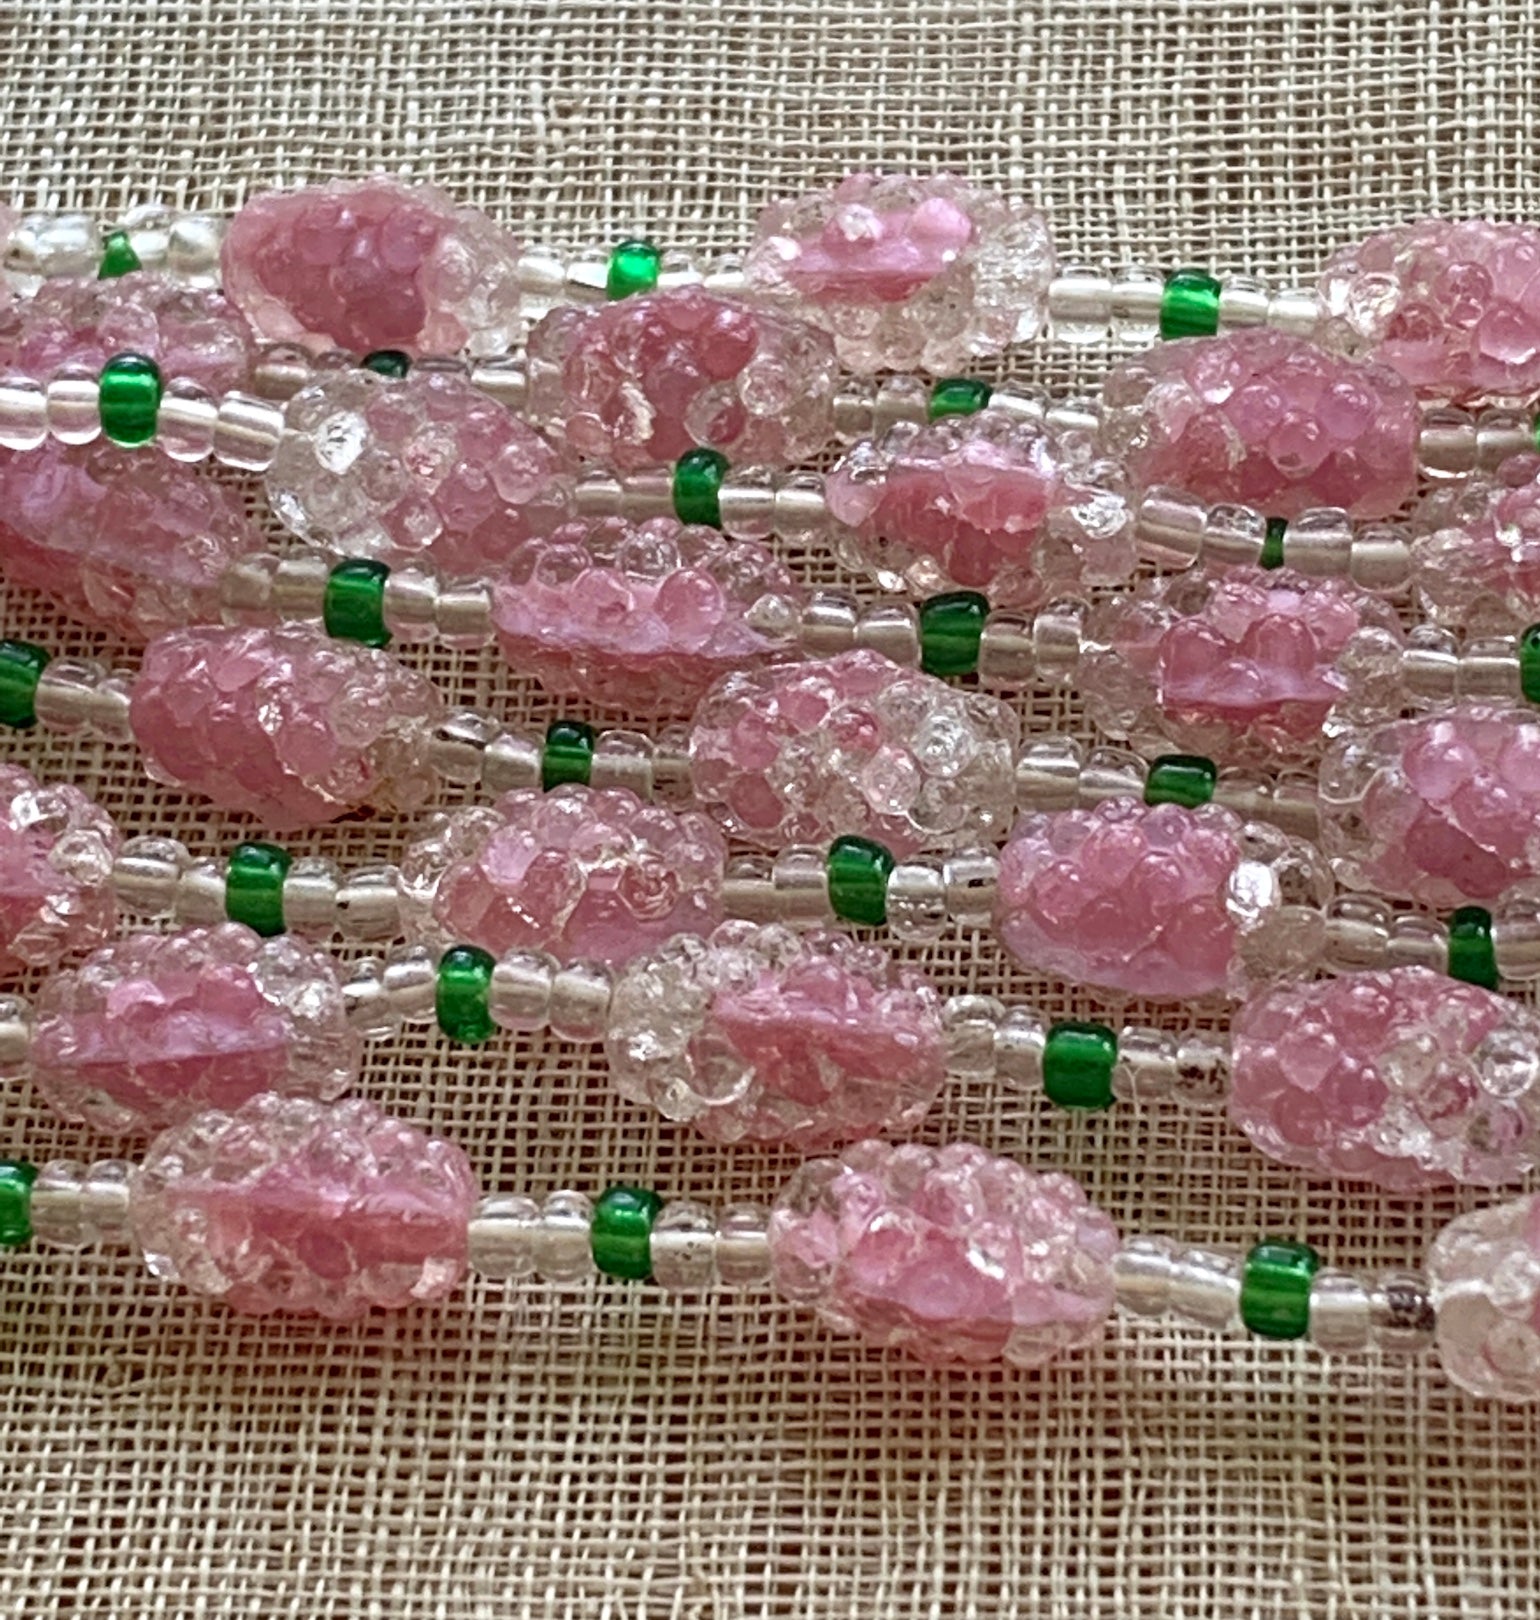 Vintage Multi Faceted Pink Bead Necklace